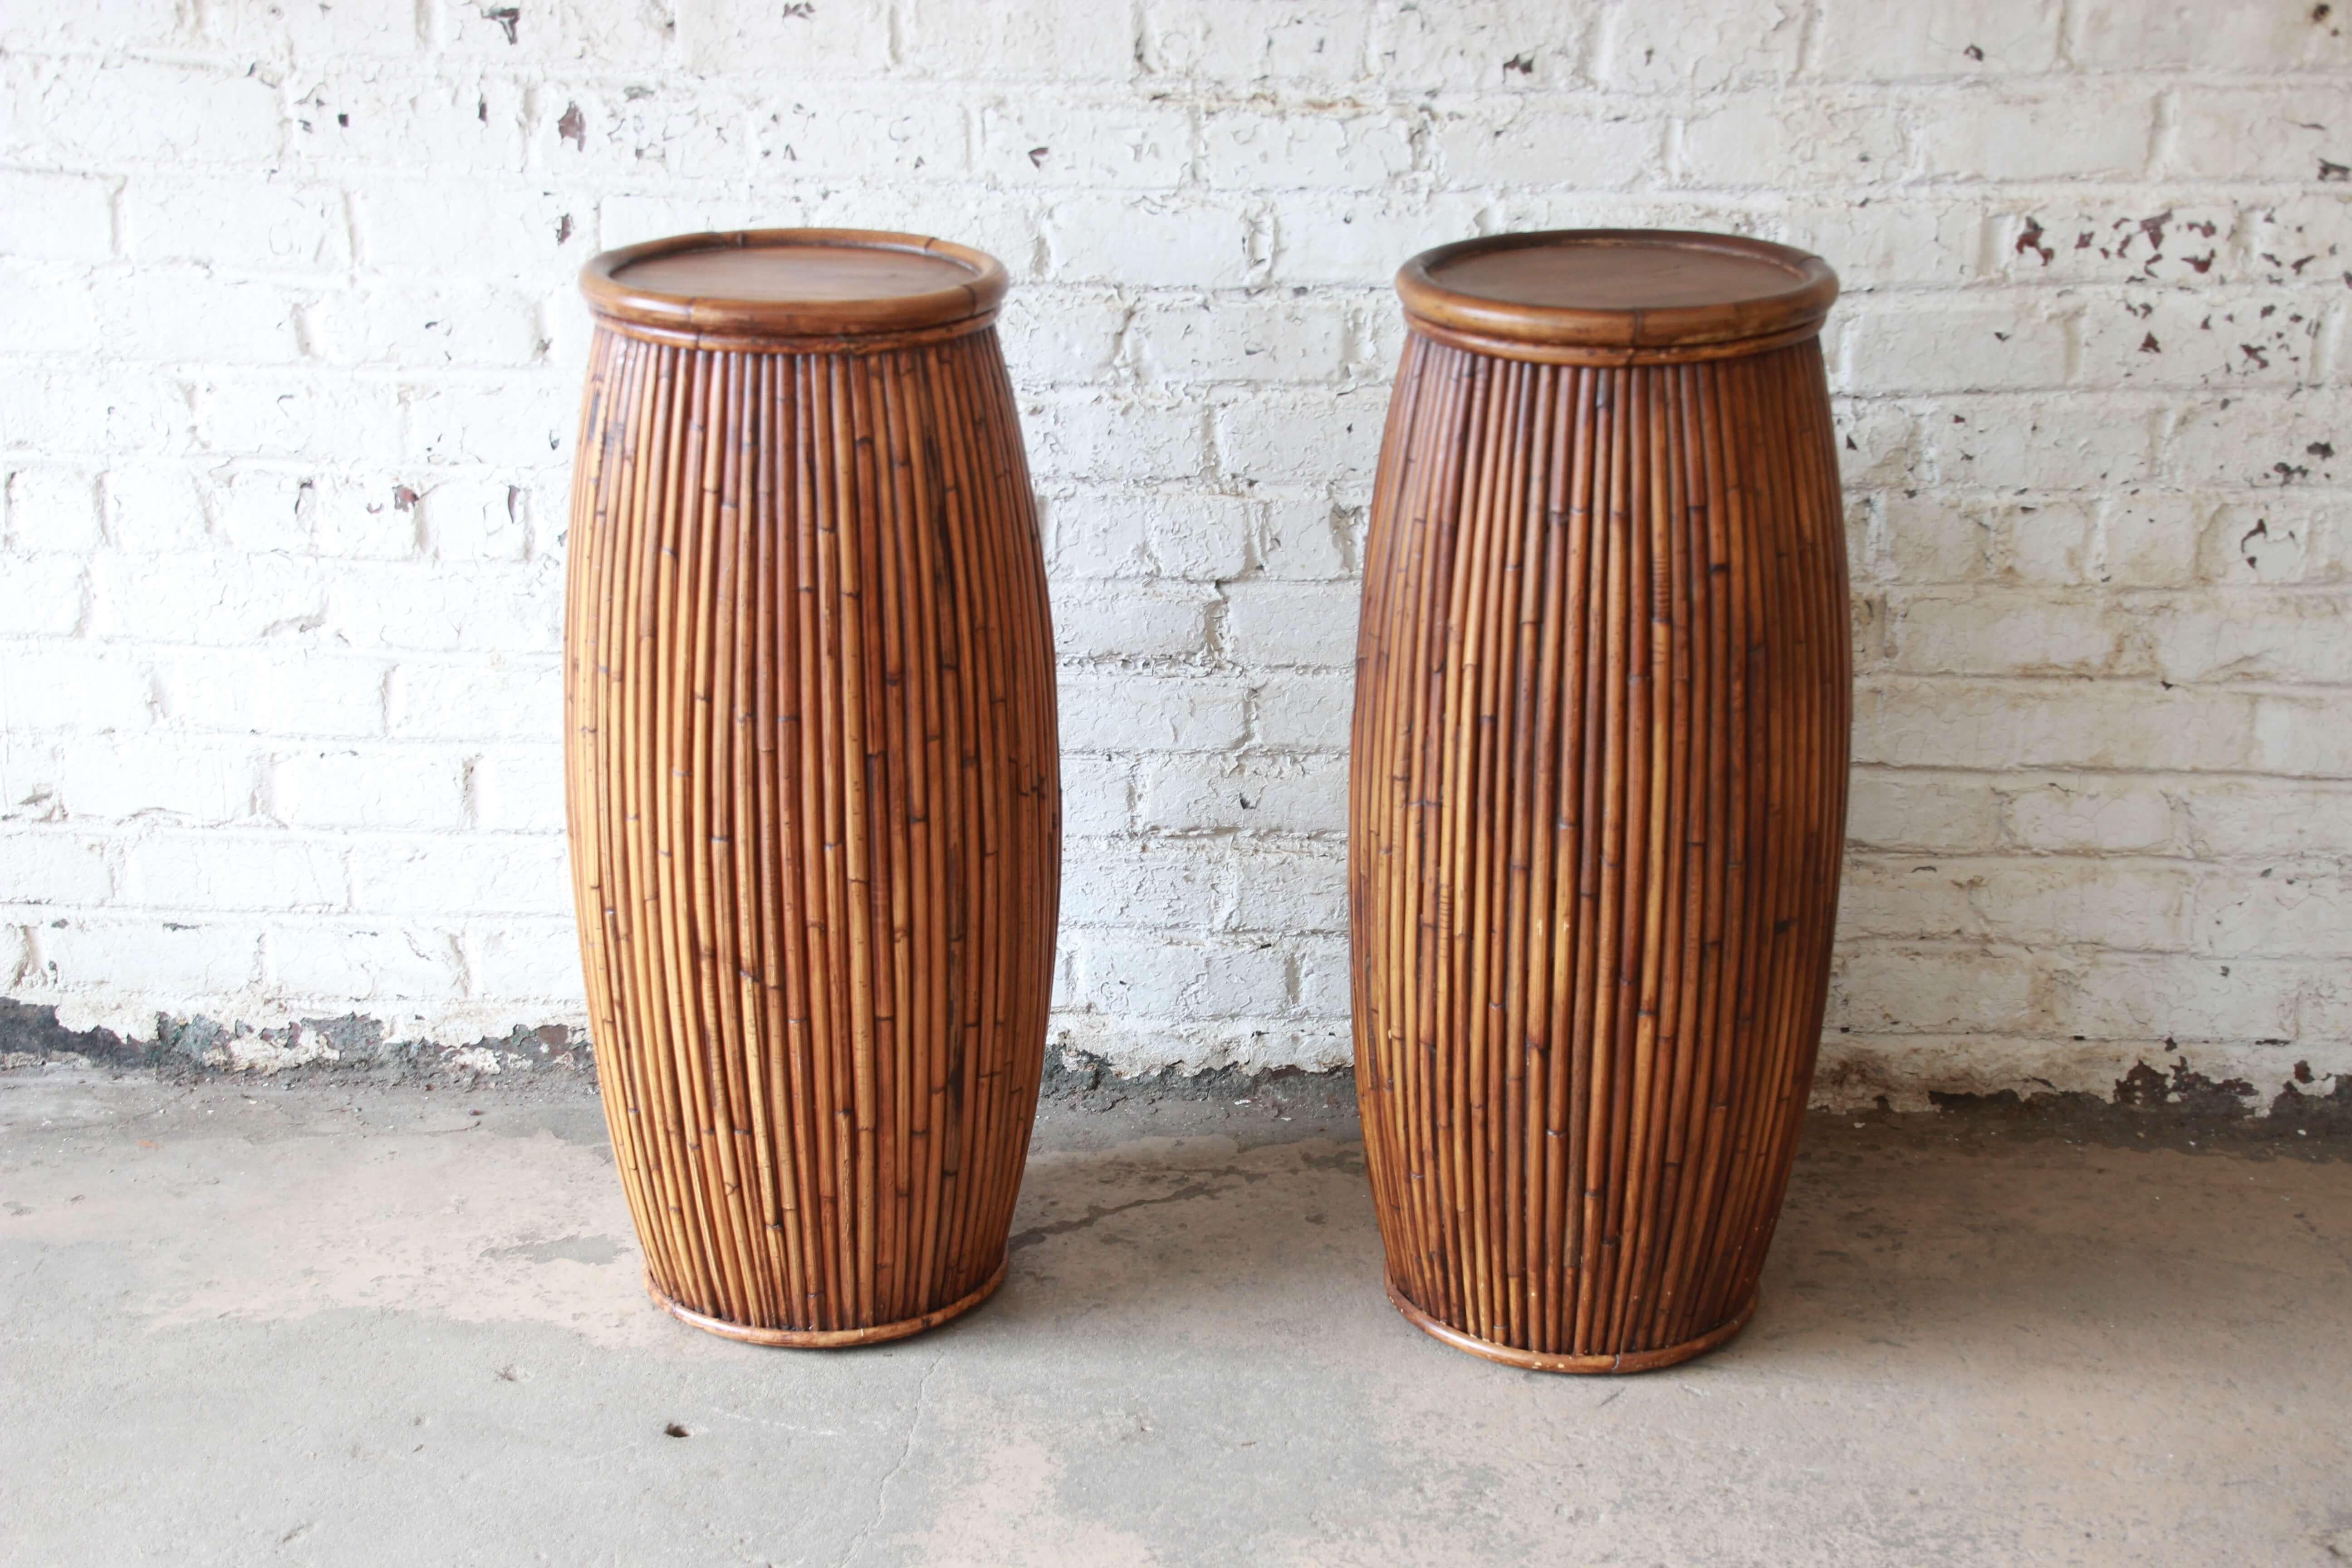 Offering a nice and rare pair of Baker Furniture bamboo plant stands. These stands have a nice finish and are very sturdy to hold many different arrange of plants, lamps, or accessories. They were manufactured for the Milling Road division of Baker